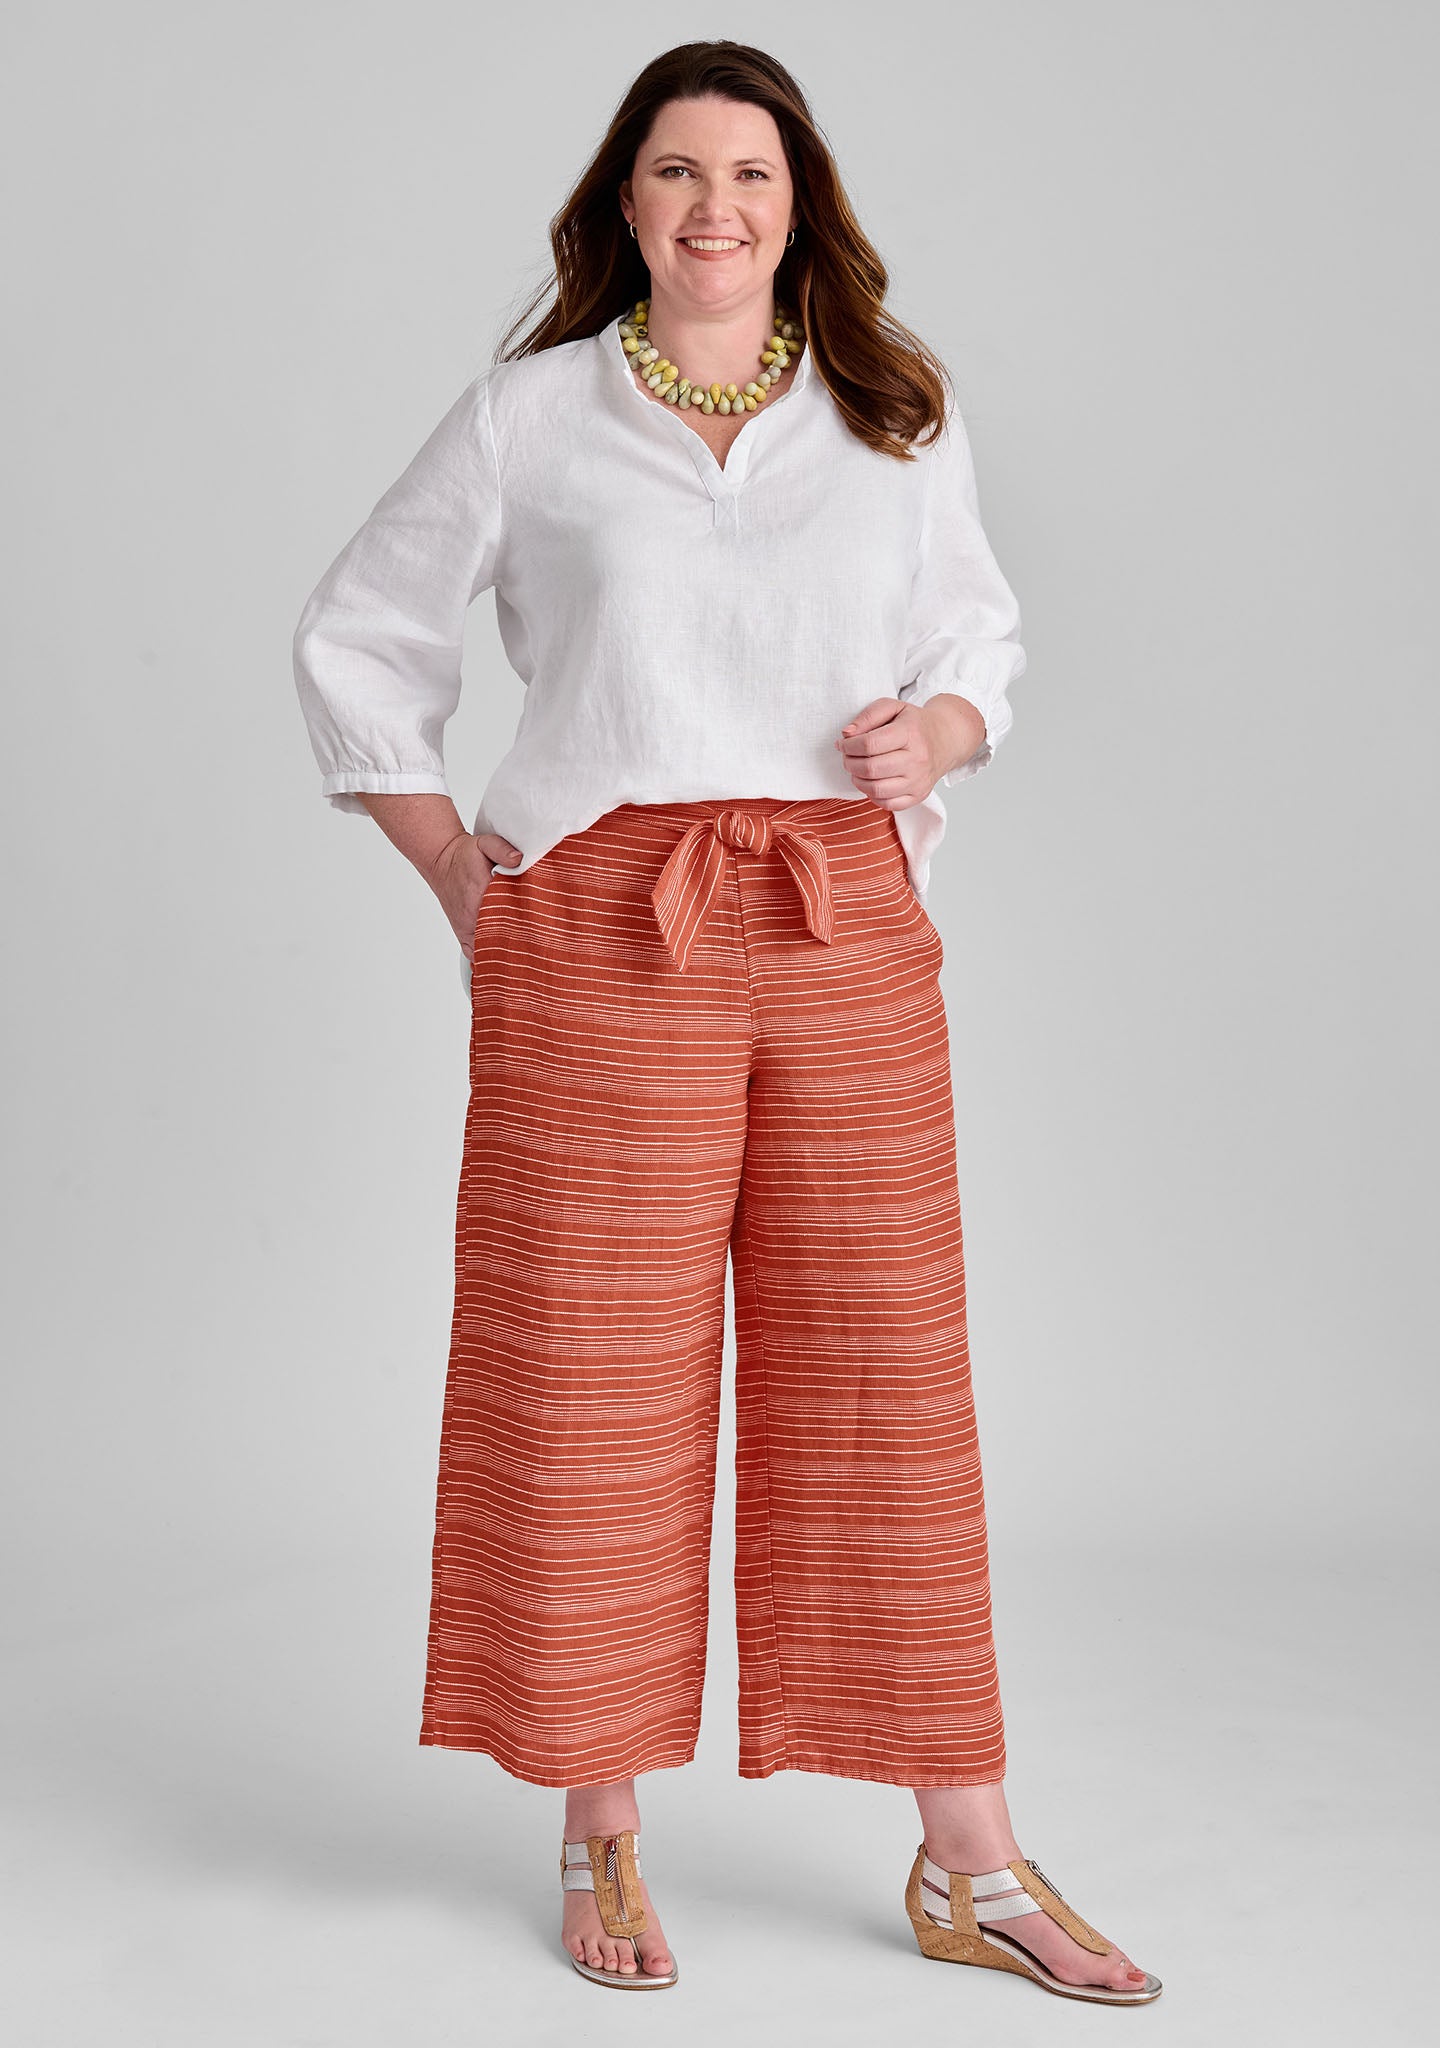 FLAX linen shirt in white with linen pants in red